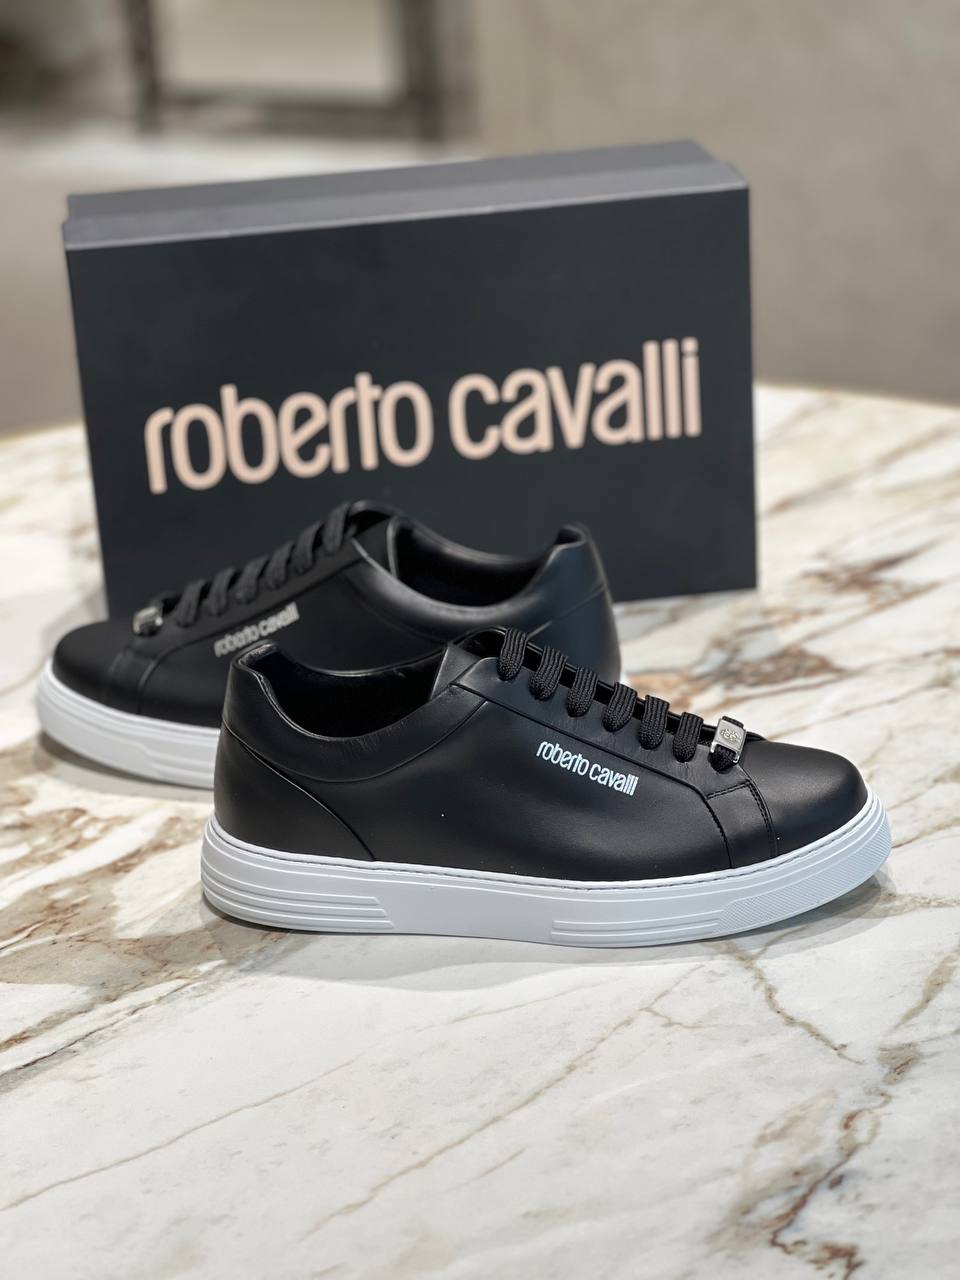 Roberto Cavalli Outlets 6115